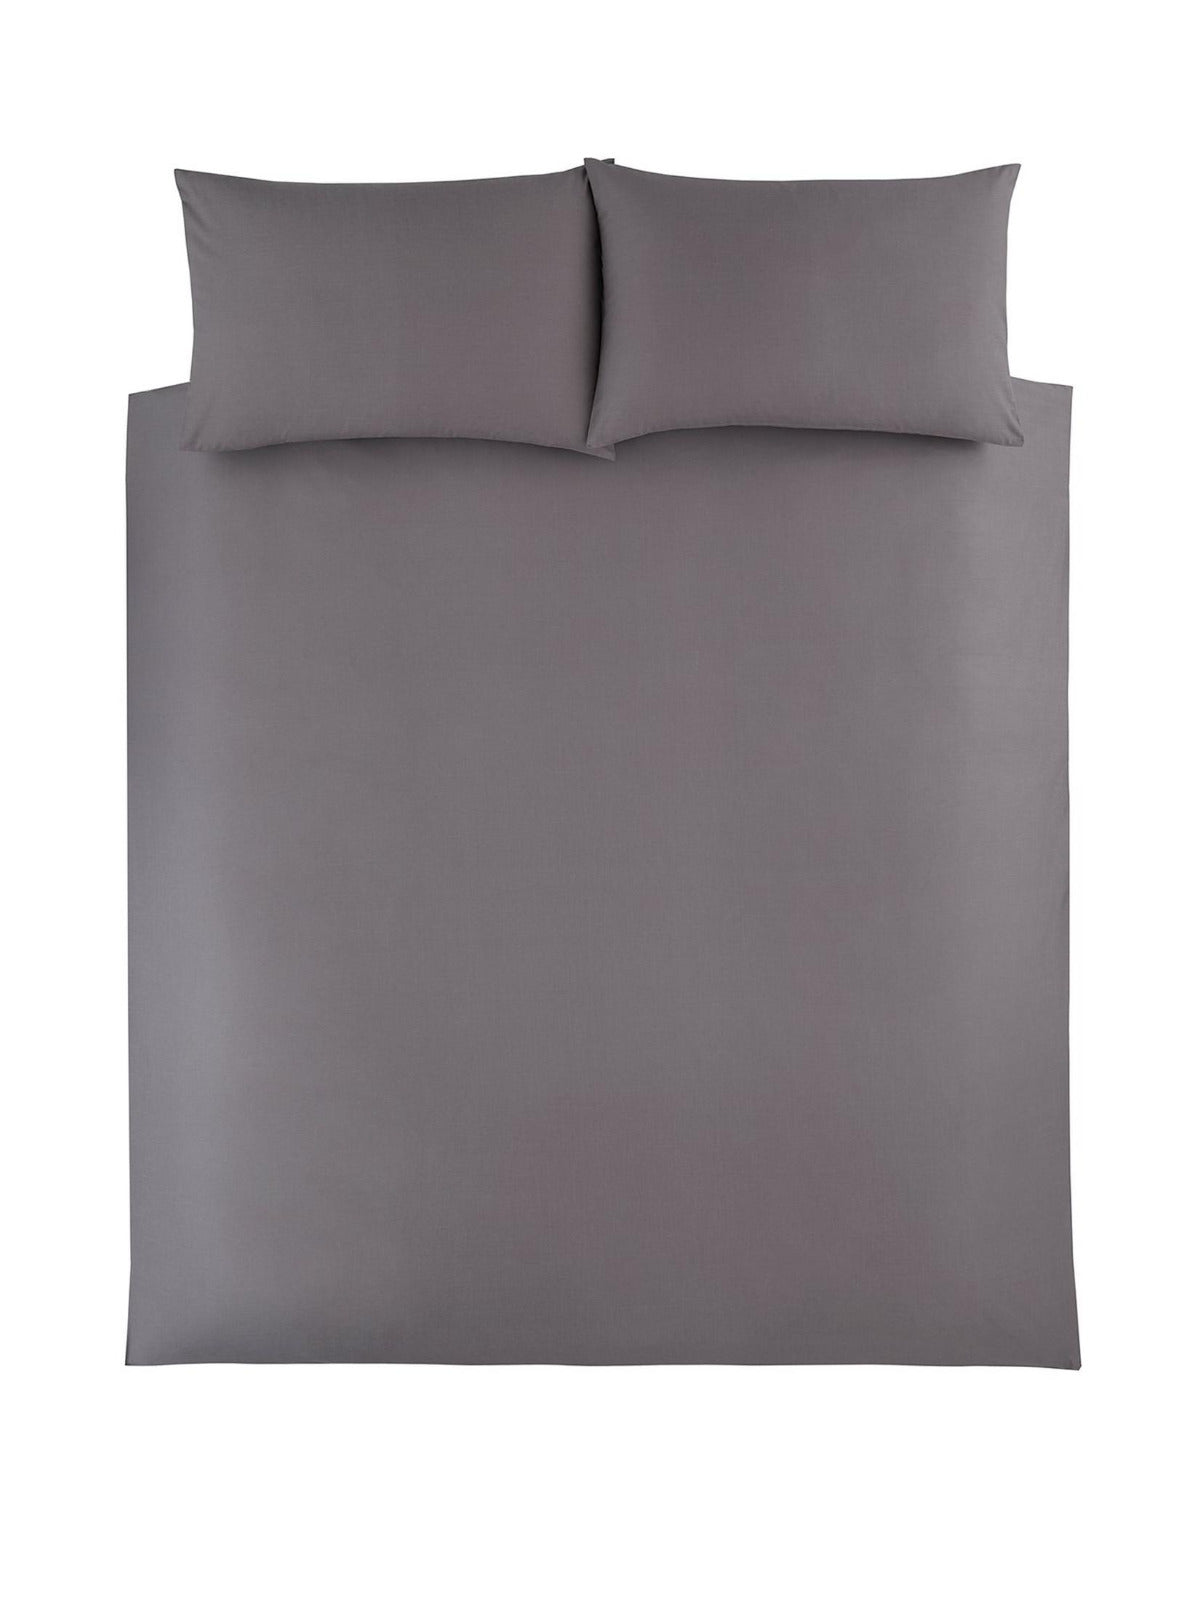 Everyday Collection Non Iron Percale Duvet Set. King. Charcoal. 180 Count. V93